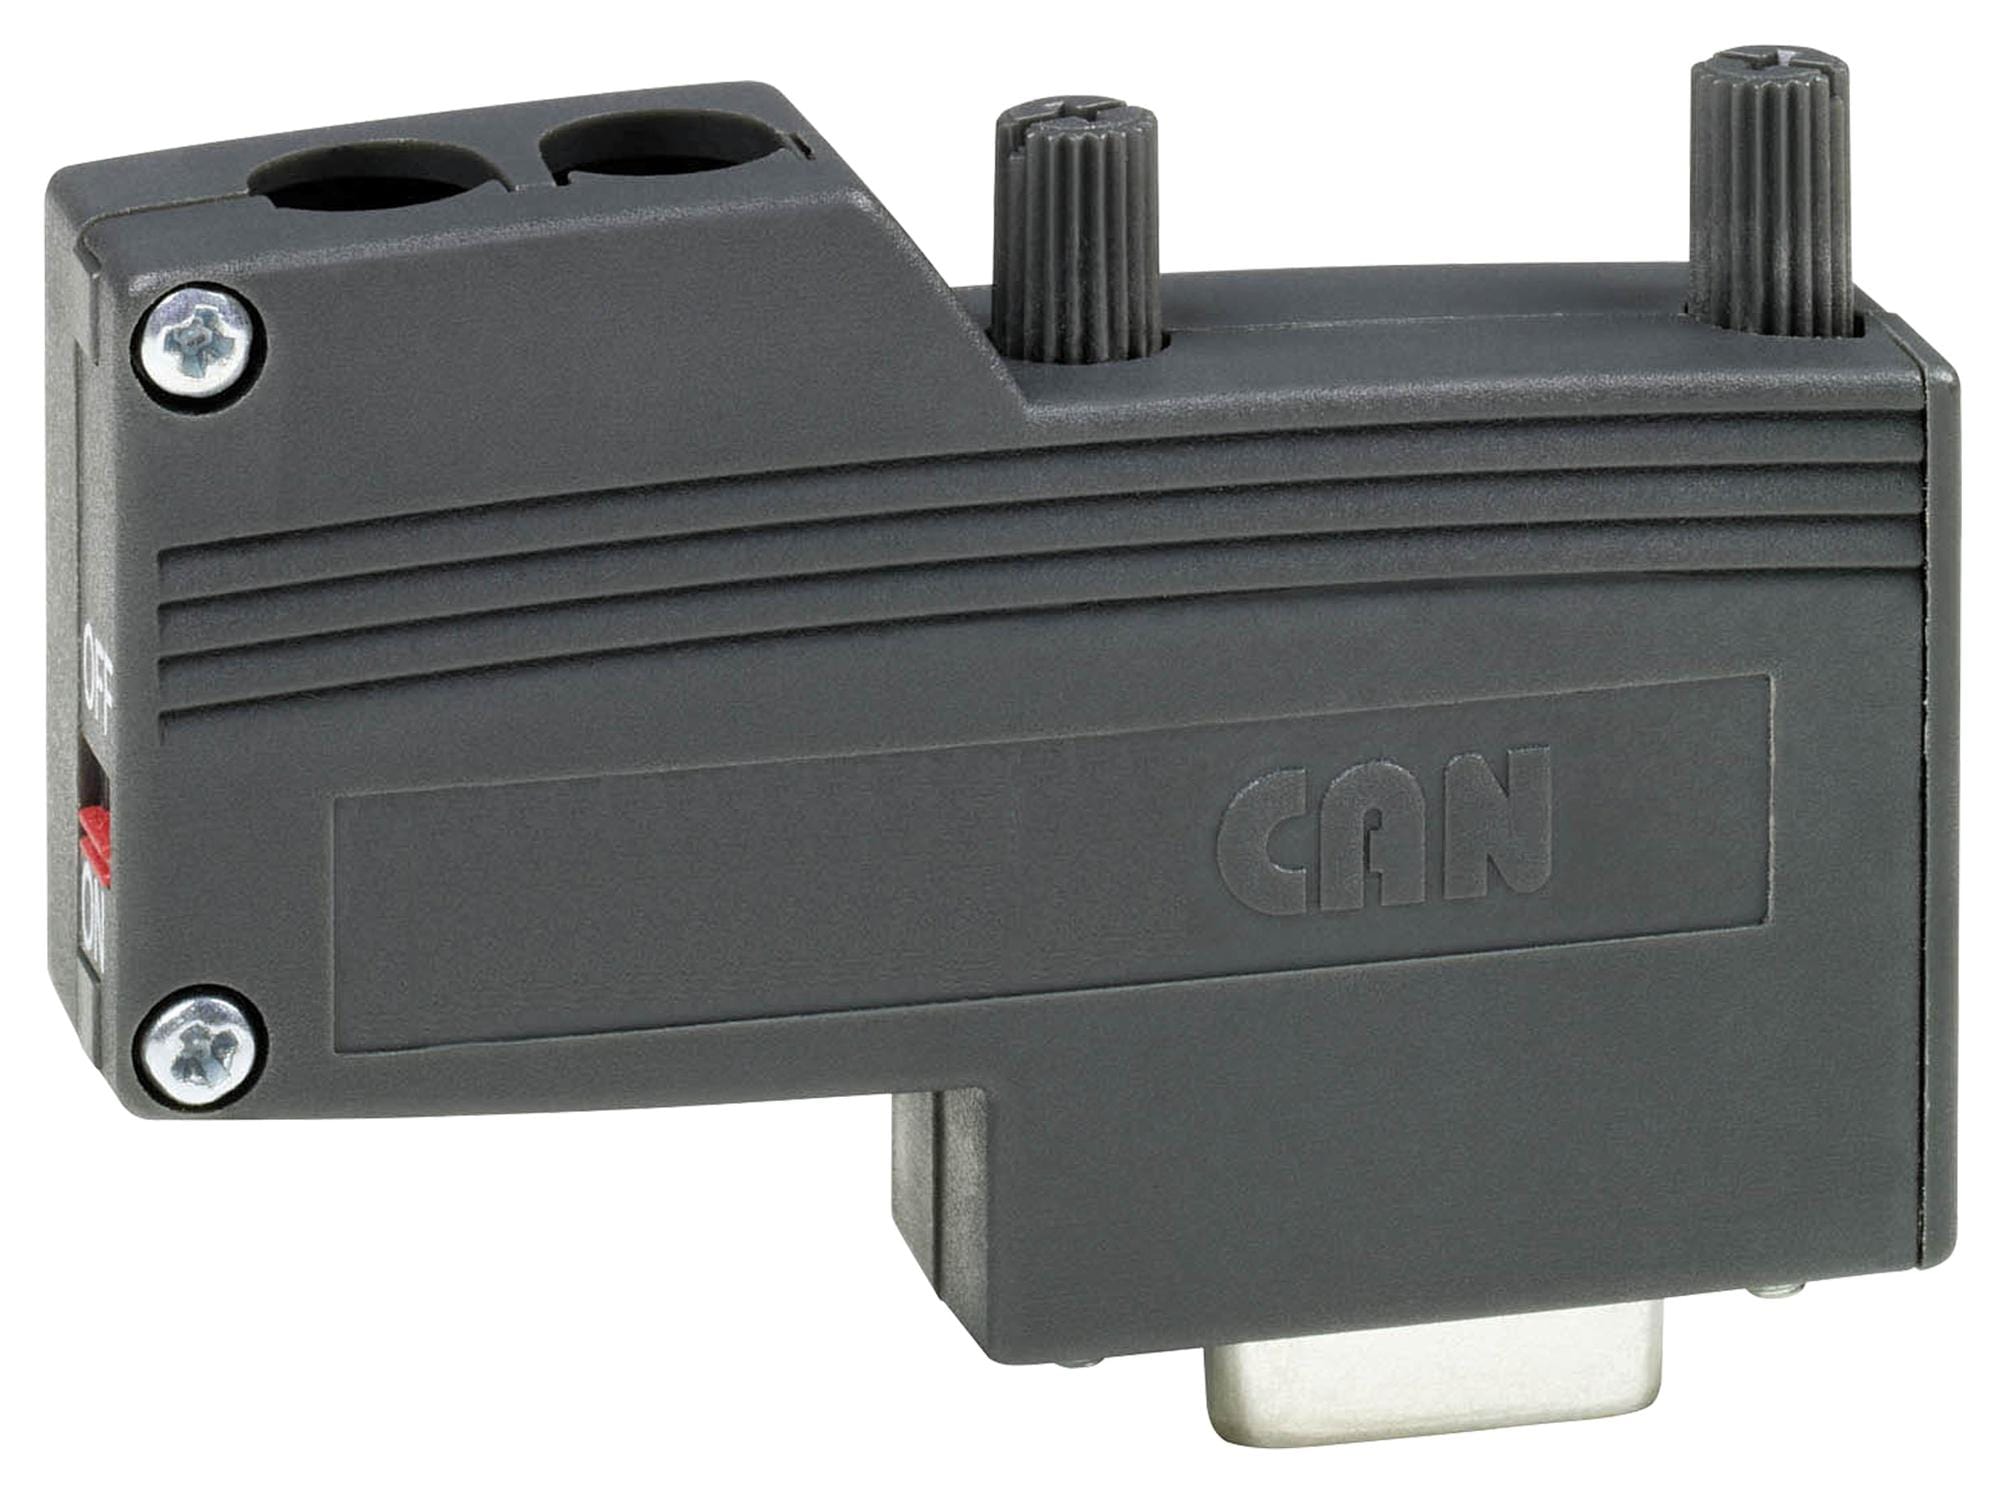 VW3CANKCDF180T CANOPEN FEMALE CONN, VAR SPEED DRIVE SCHNEIDER ELECTRIC